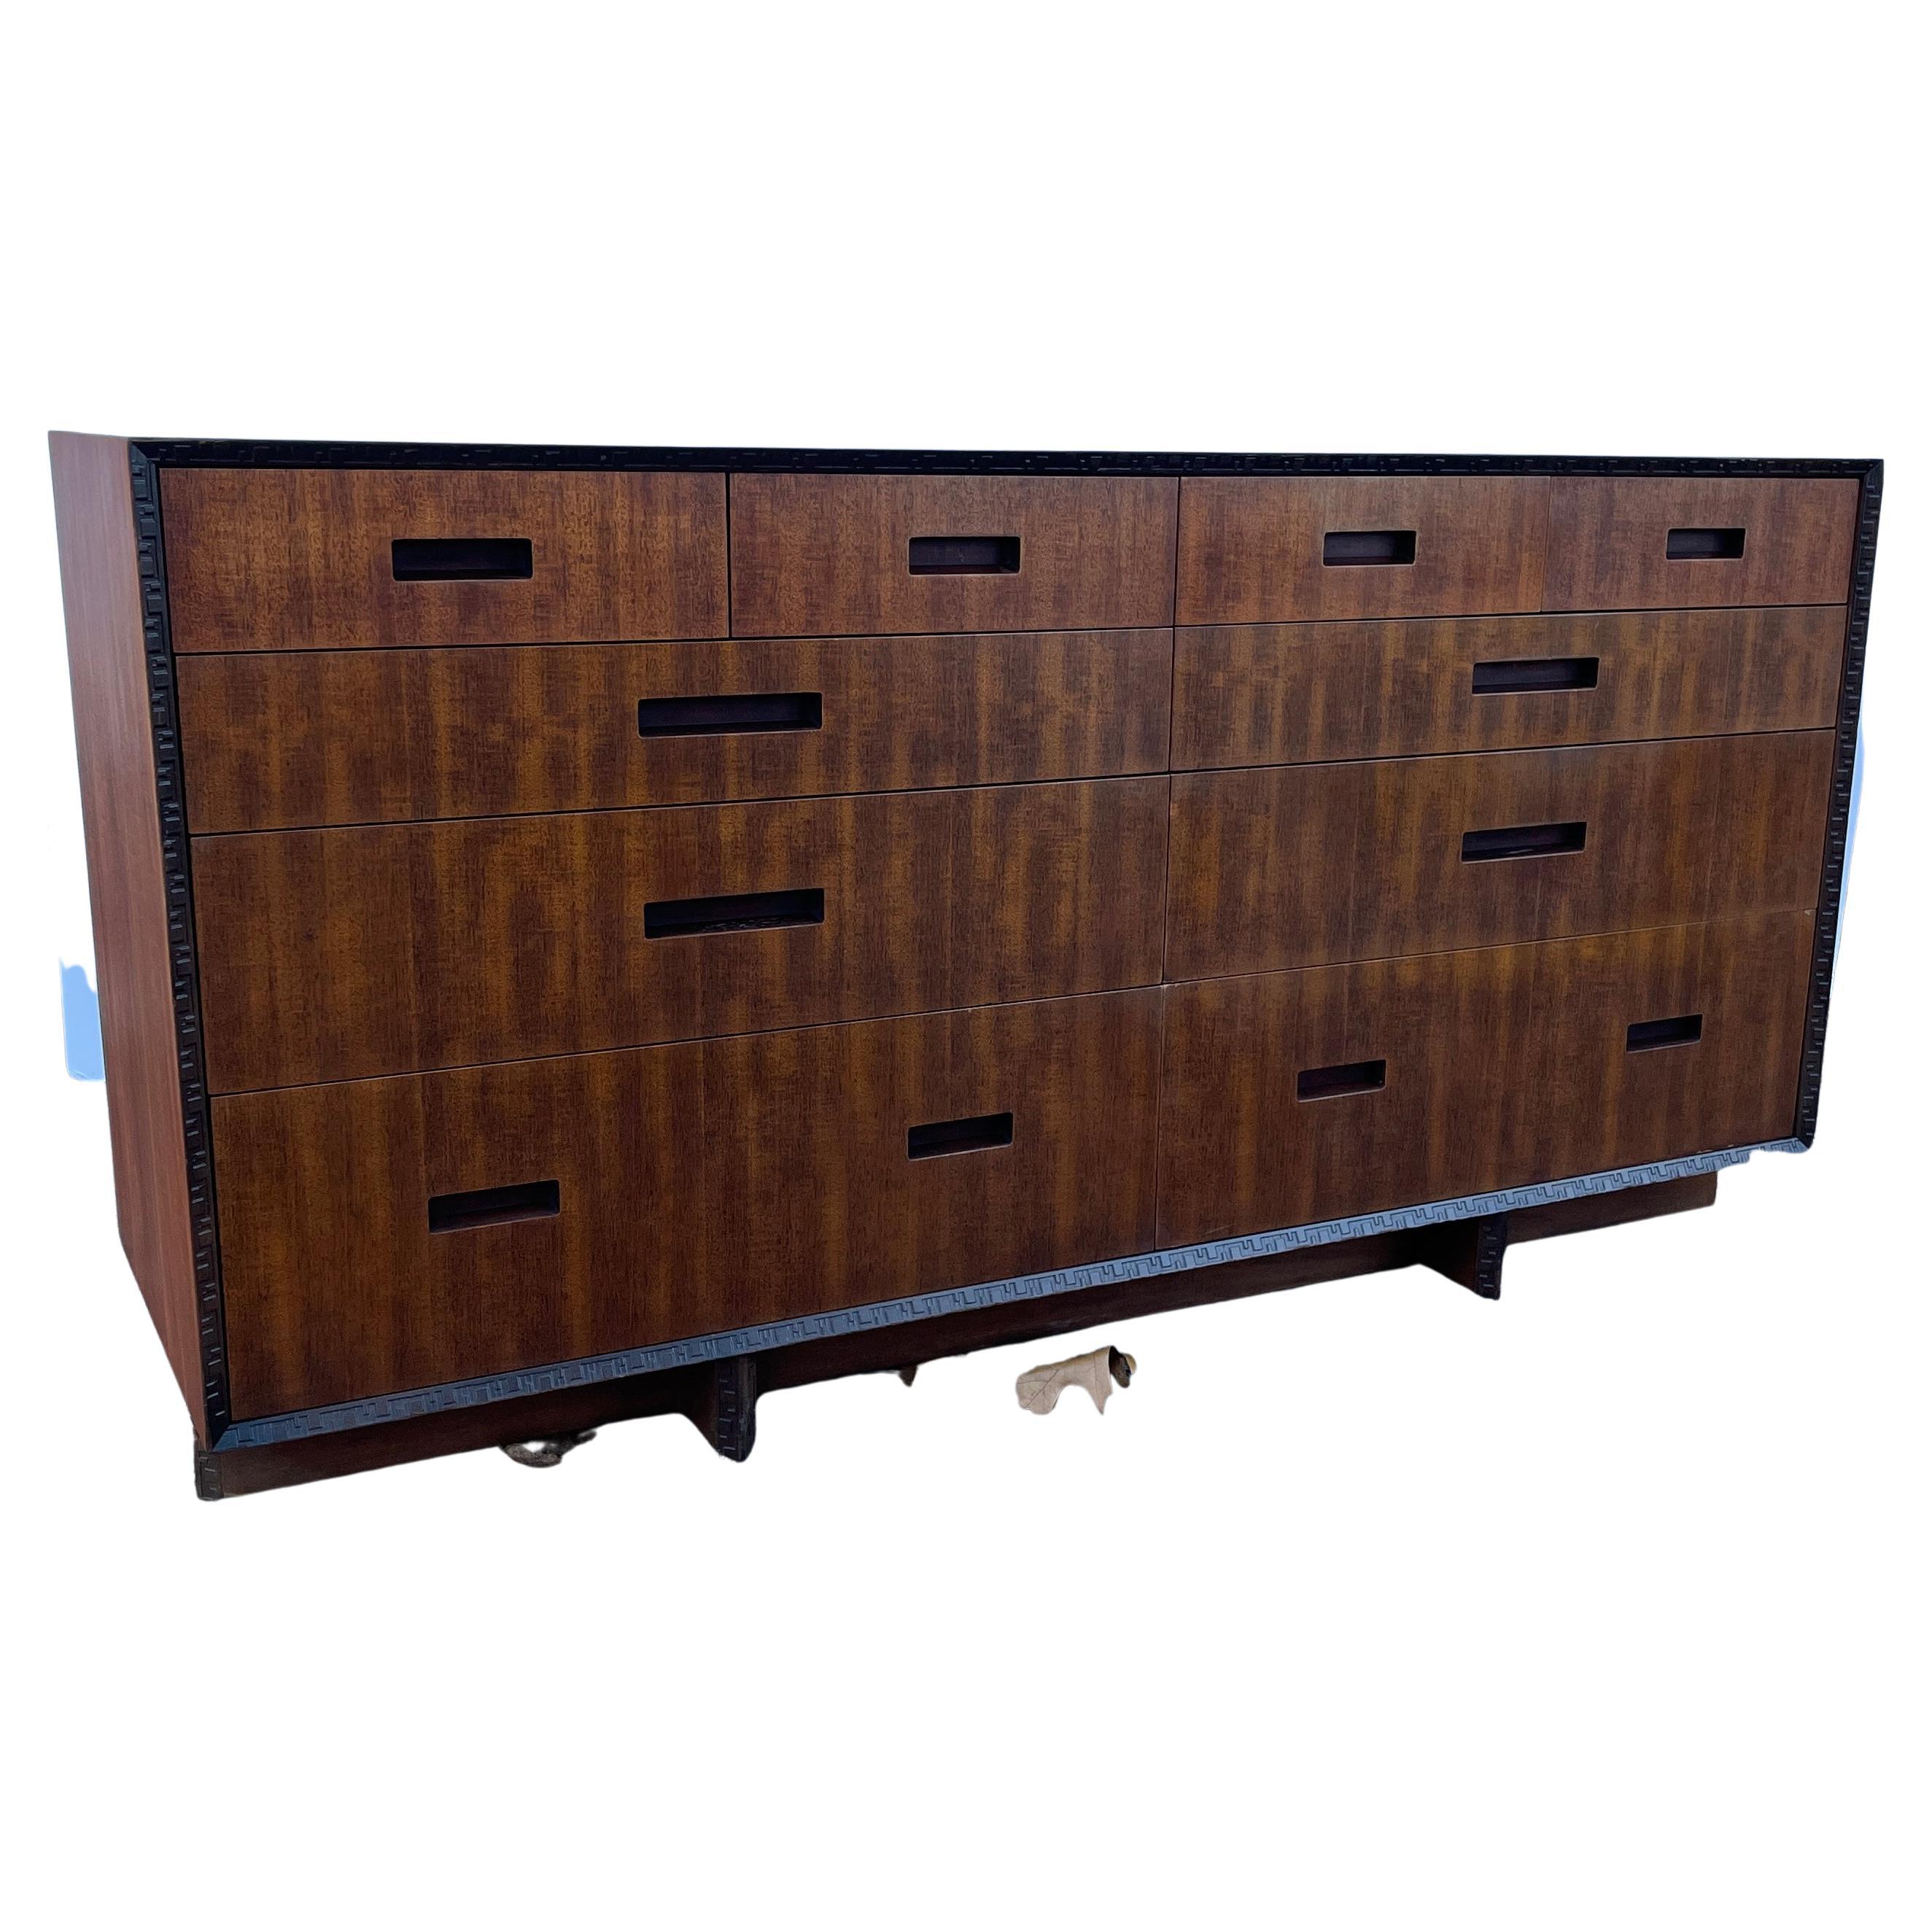 A Mid-Century Modern gorgeous twelve-drawer mahogany dresser or credenza by Frank Lloyd Wright for Heritage-Henredon furniture collection. Carved geometric banding and 